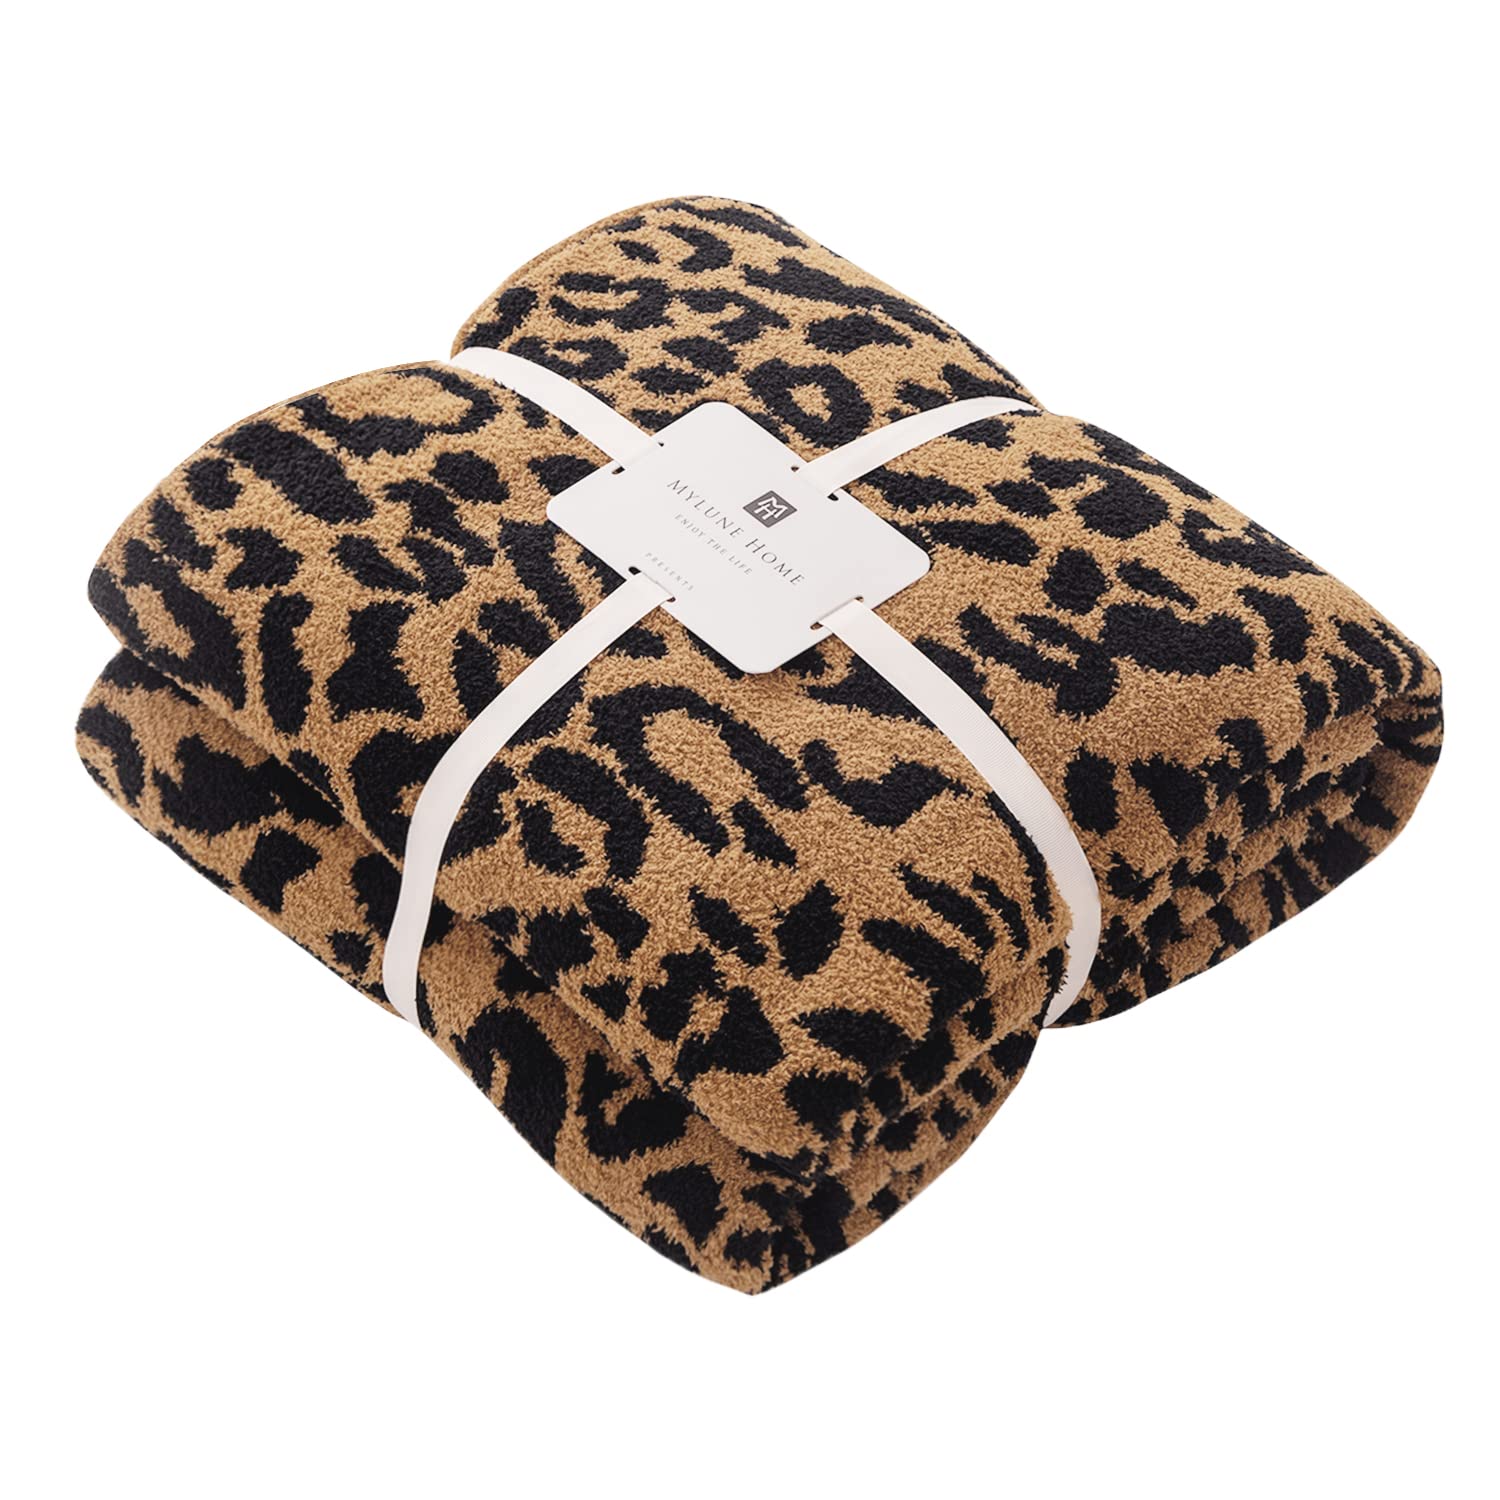 MH MYLUNE HOME Micro Plush Leopard Blanket (51x63 inches, Brown) Ultra Soft & Warm Reversible Leopard Pattern Throw Blanket for 